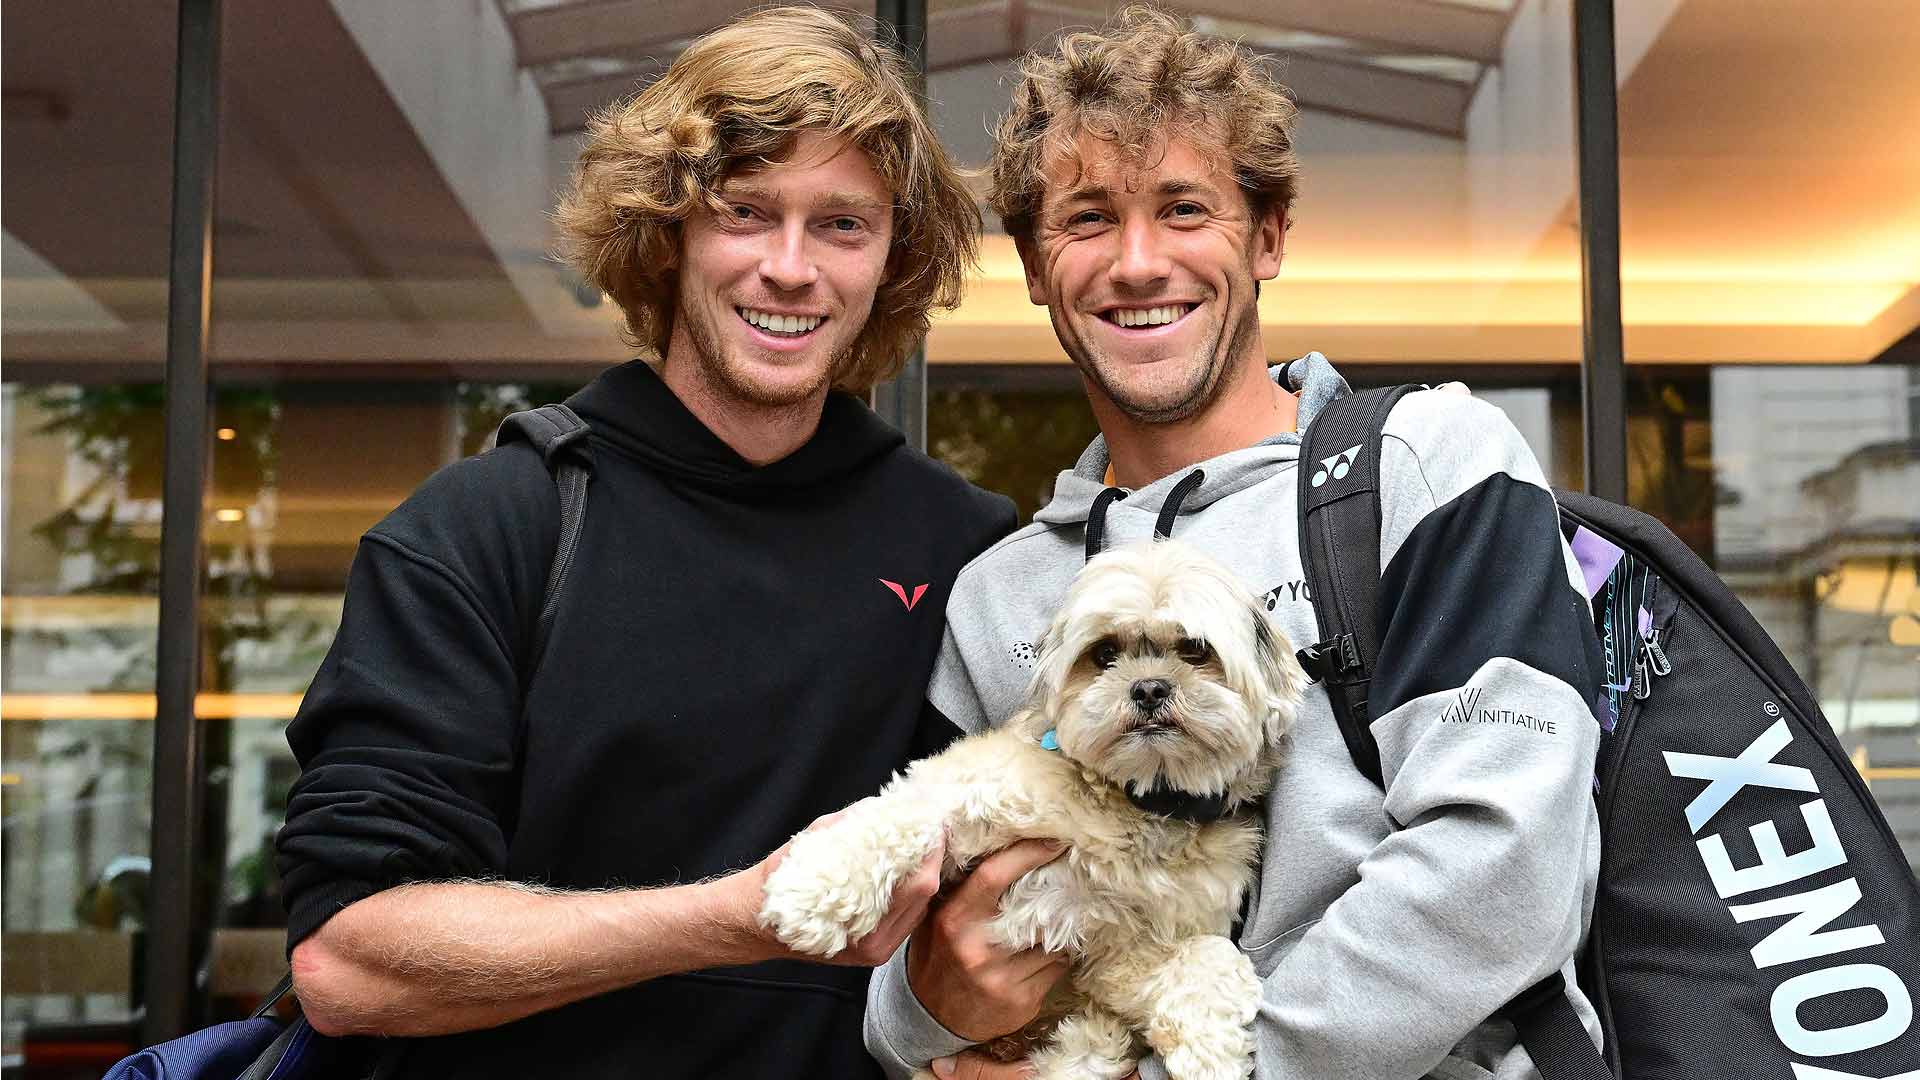 Andrey Rublev and Casper Ruud, who could meet in the Hamburg final, pose with Ruud's dog, Bajas.